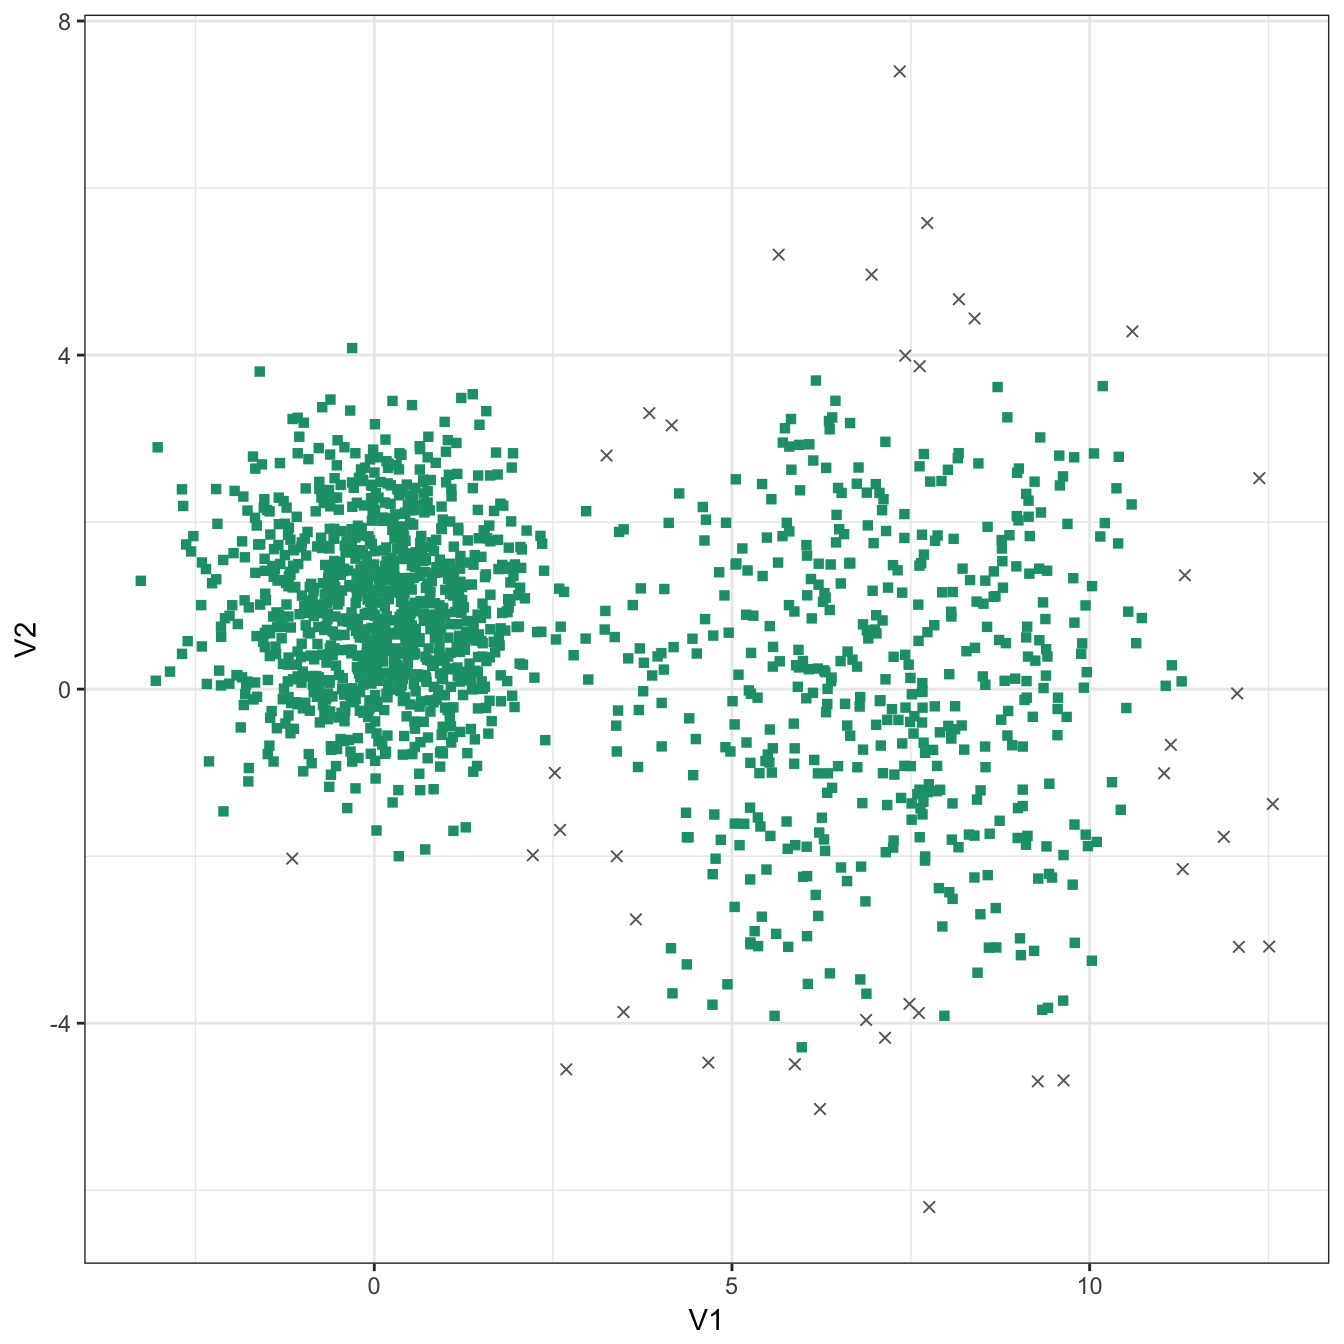 DBSCAN clustering of the different density distribution data set with eps=0.9 and minPts=10. Outlier observations are shown as grey crosses.